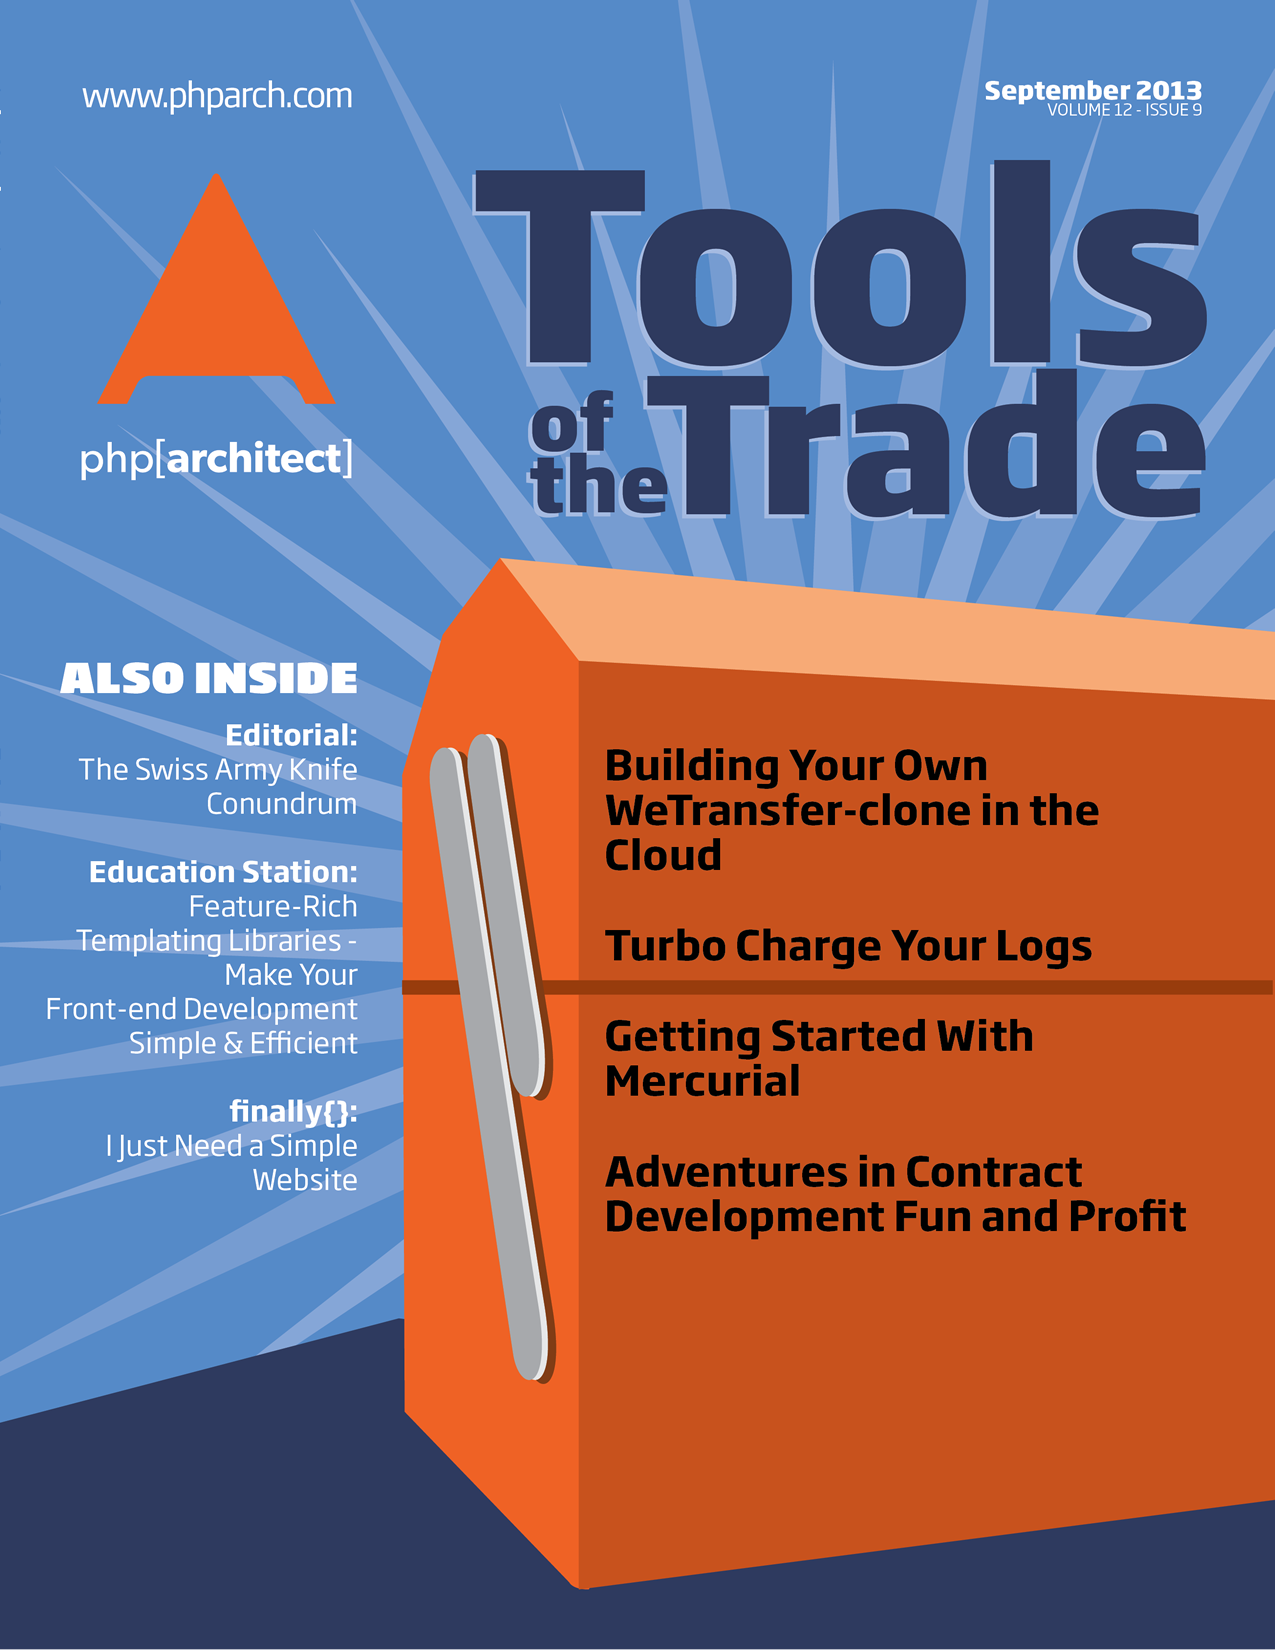 php[architect] September 2013 - Tools of the Trade